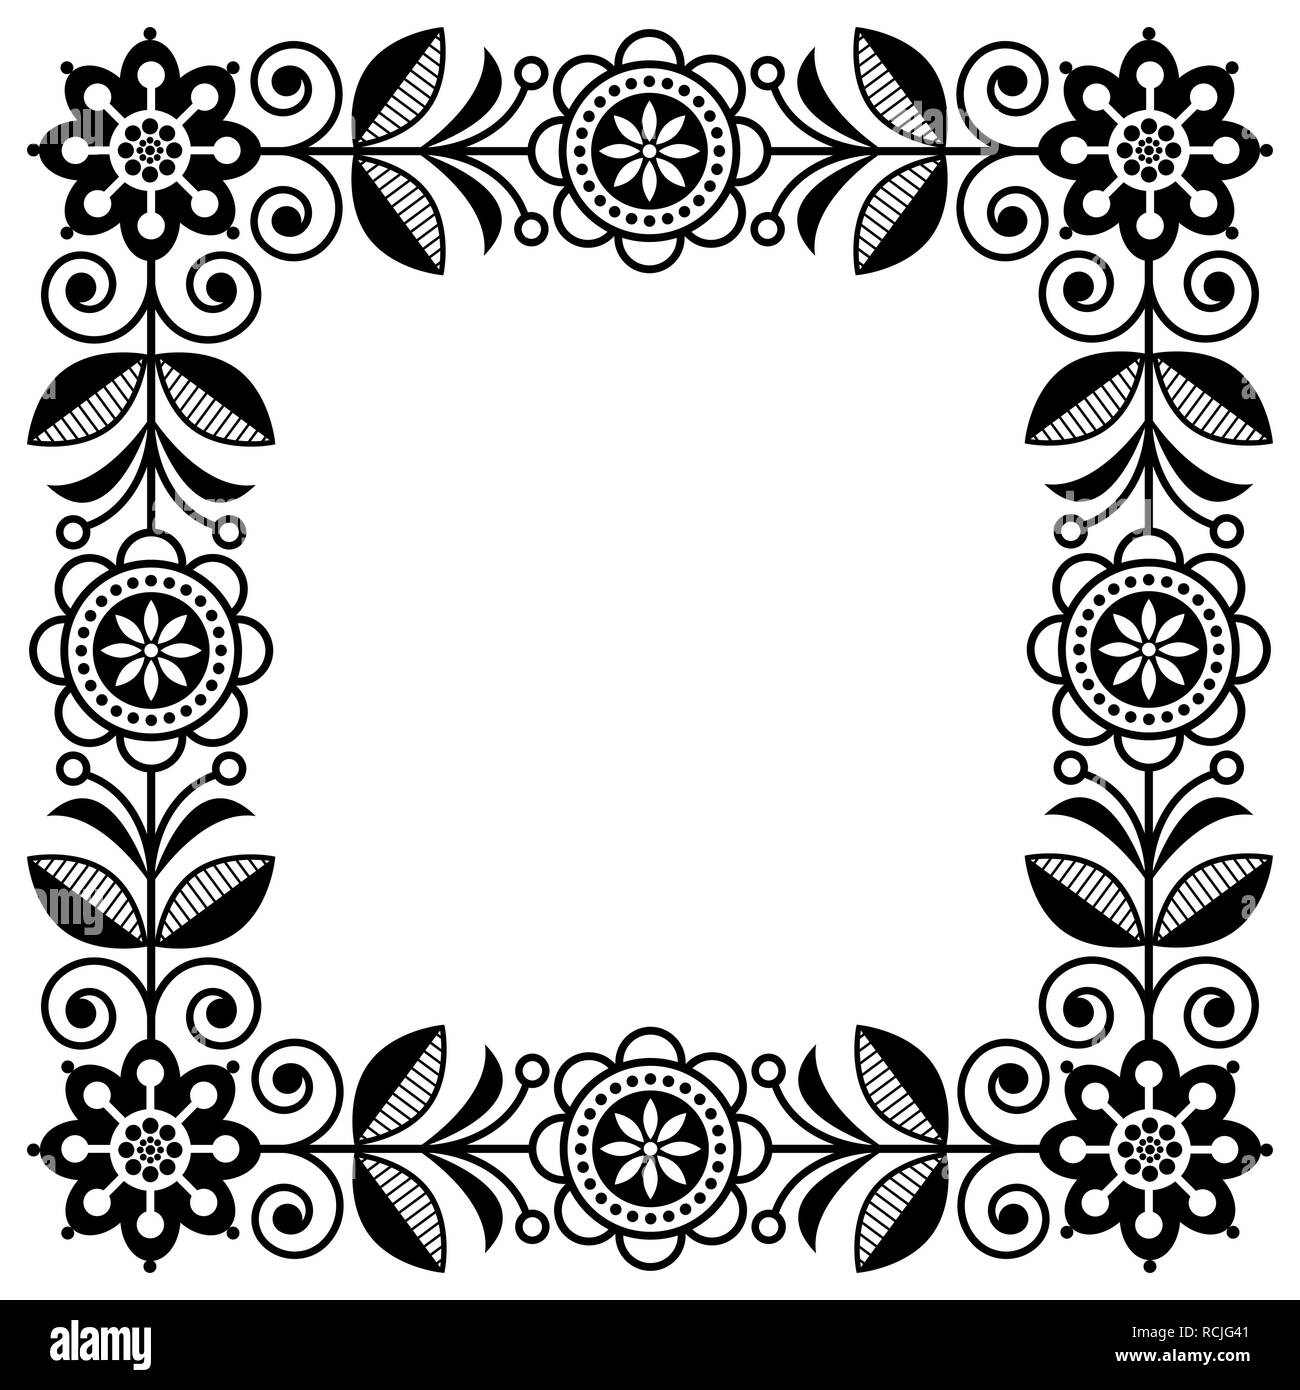 Scandinavian folk art vector frame, cute floral border, square pattern with monochrome flowers - invitation, greetings card Stock Vector